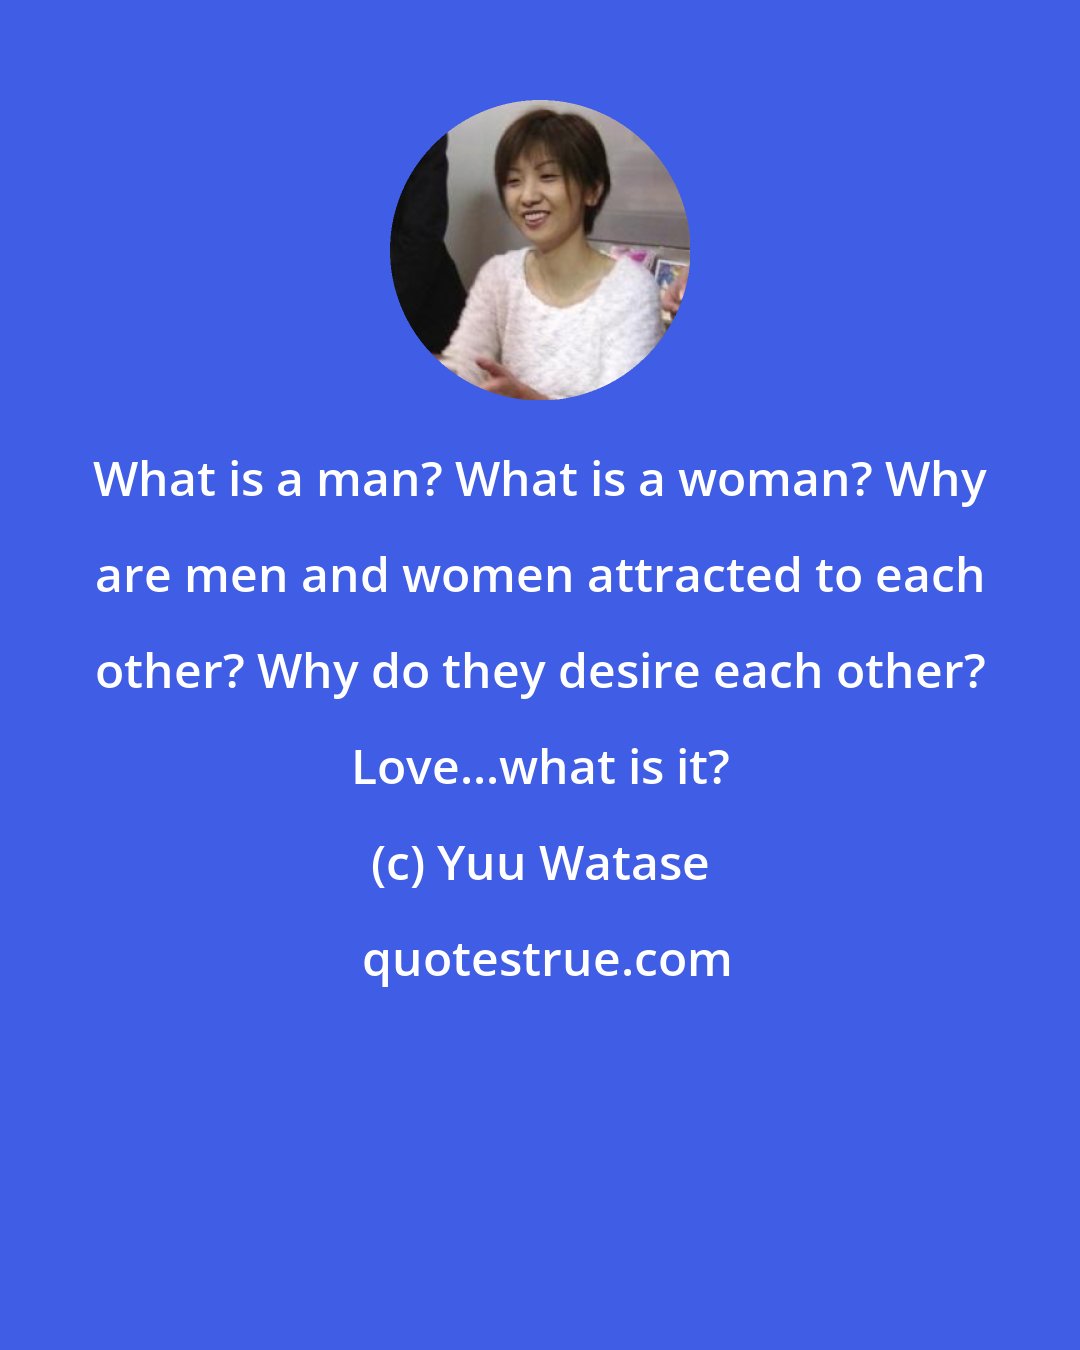 Yuu Watase: What is a man? What is a woman? Why are men and women attracted to each other? Why do they desire each other? Love...what is it?